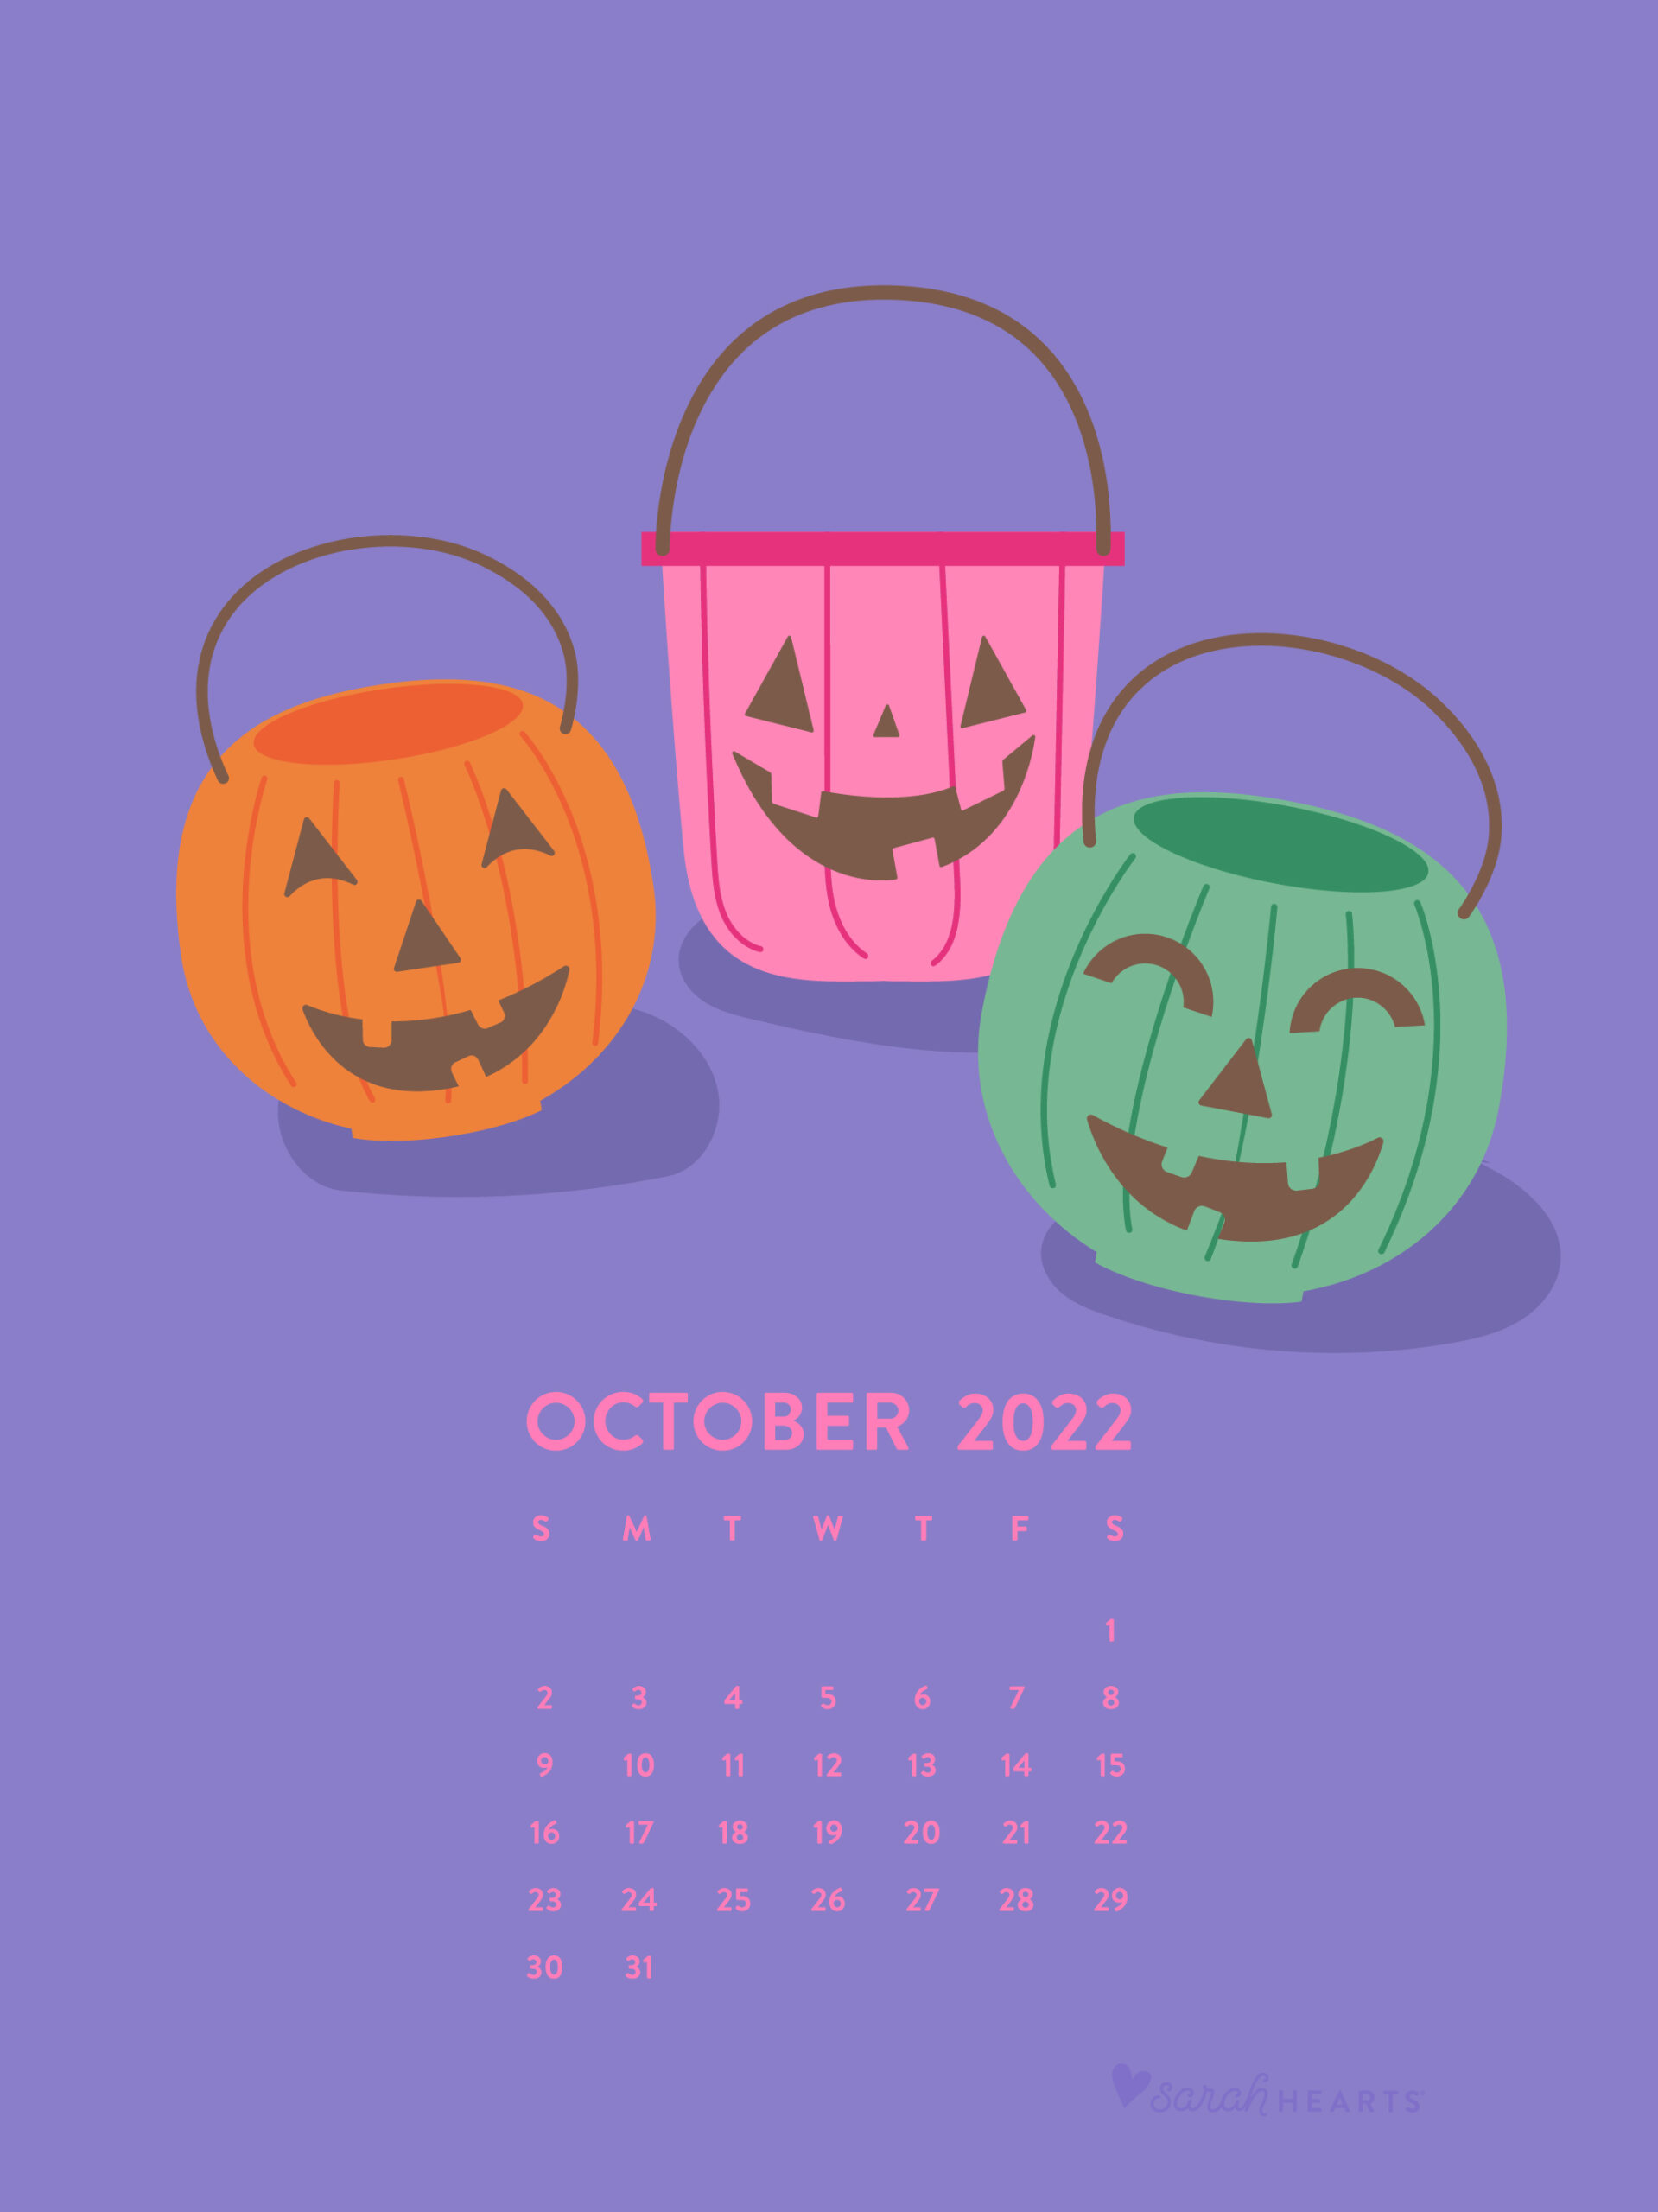 Cute 2022 October calendar monthly mobile wallpaper  free image by  rawpixelcom  Sasi in 2023  October calendar wallpaper Calendar wallpaper  October calendar